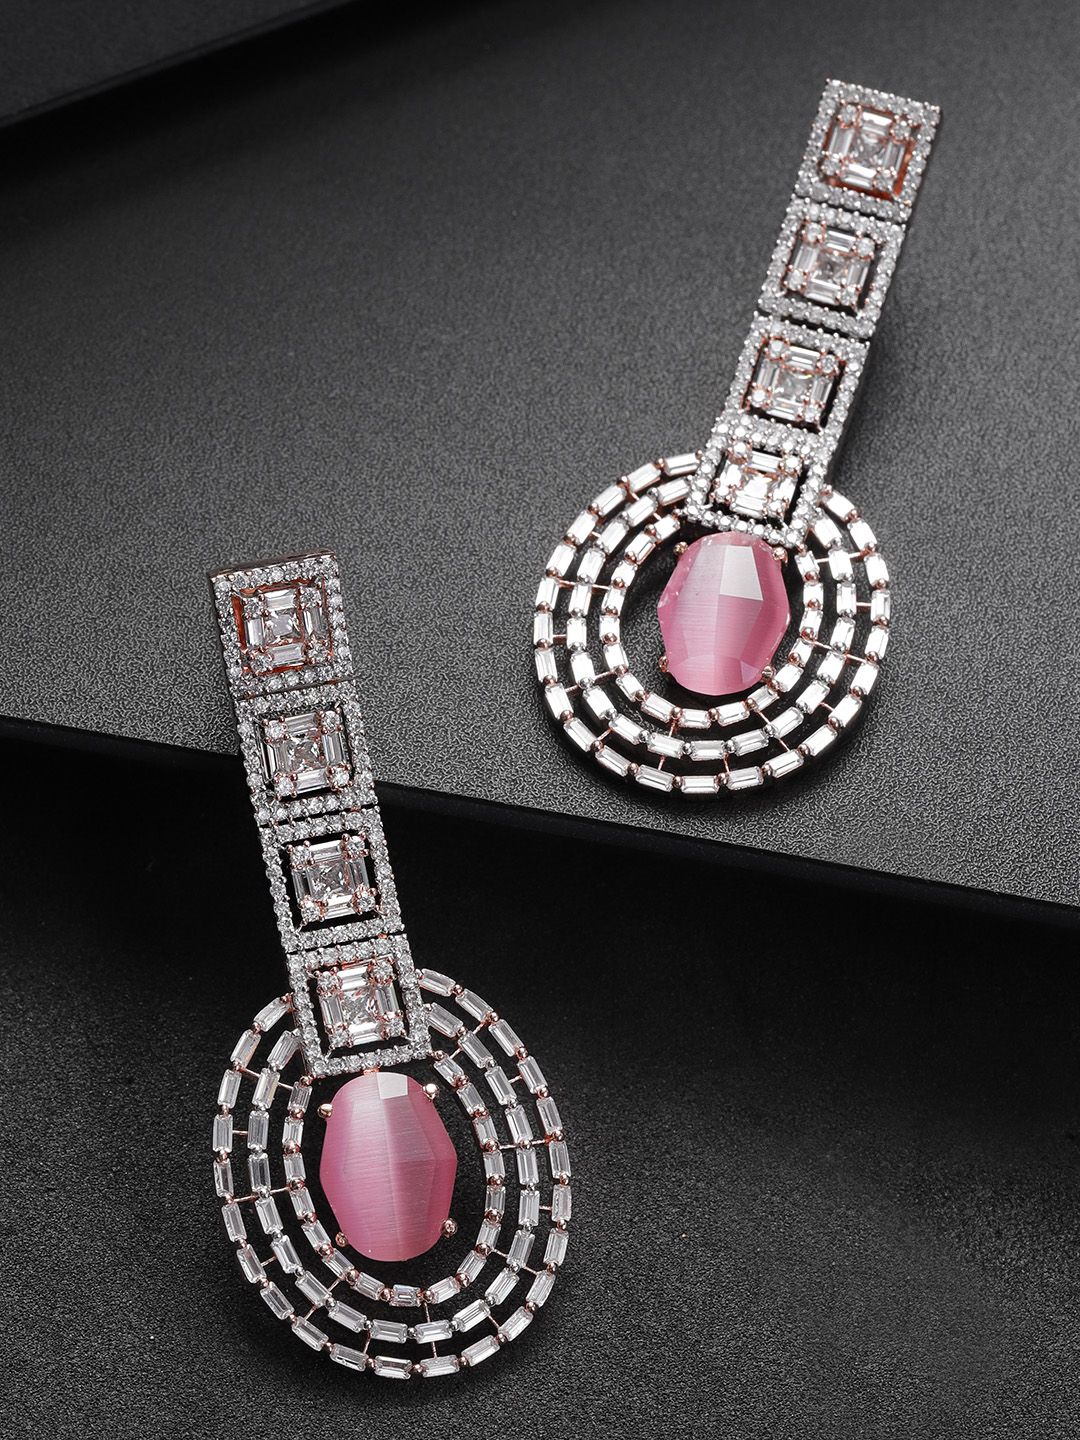 Priyaasi Pink Rose Gold-Plated CZ & AD-Studded Handcrafted Oval Drop Earrings Price in India